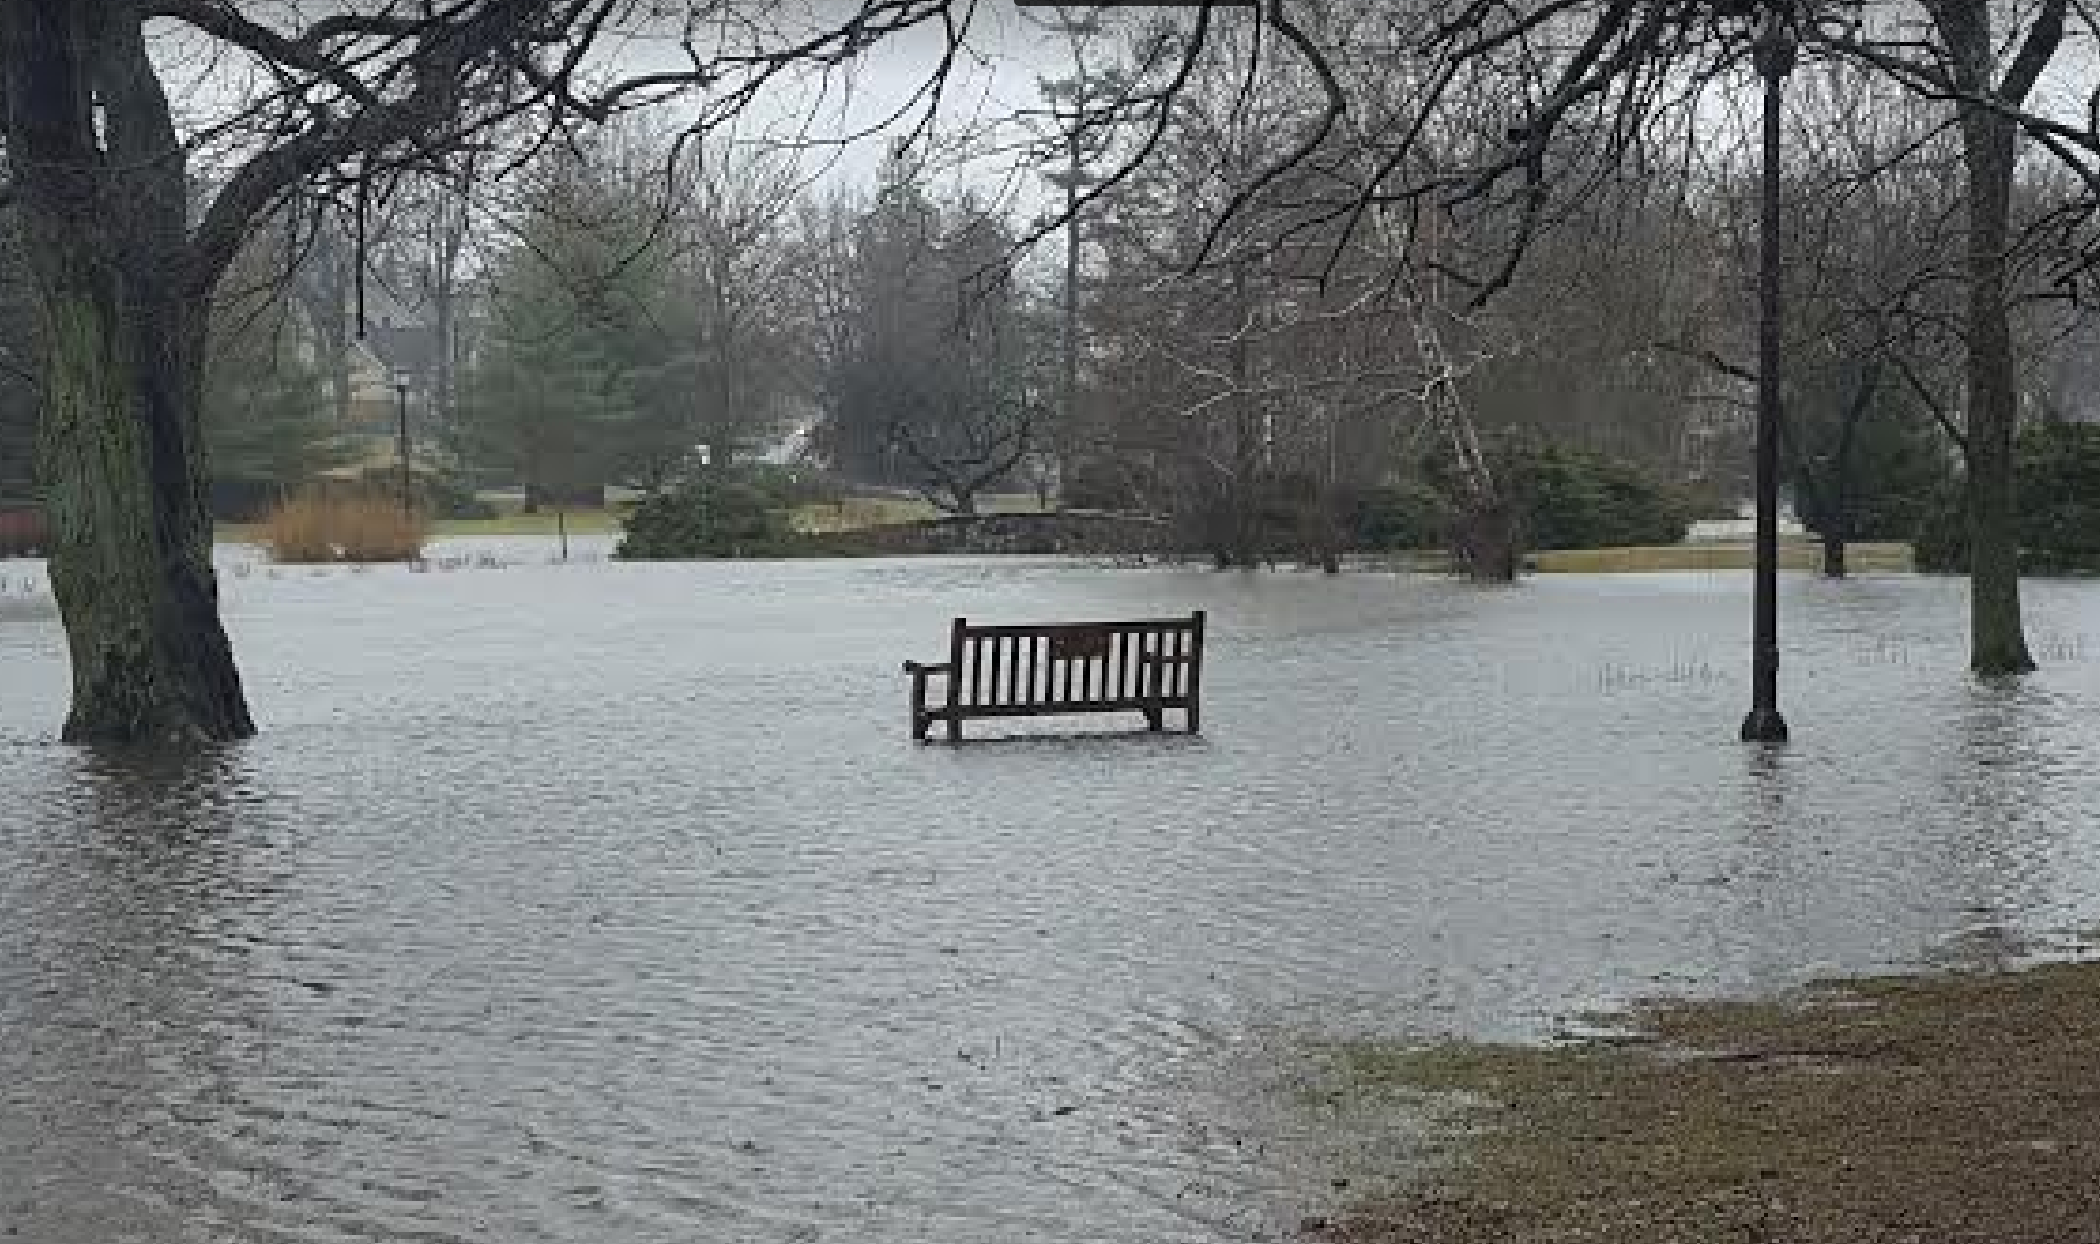 Flooding in Binney Park. Contributed March 2, 2018